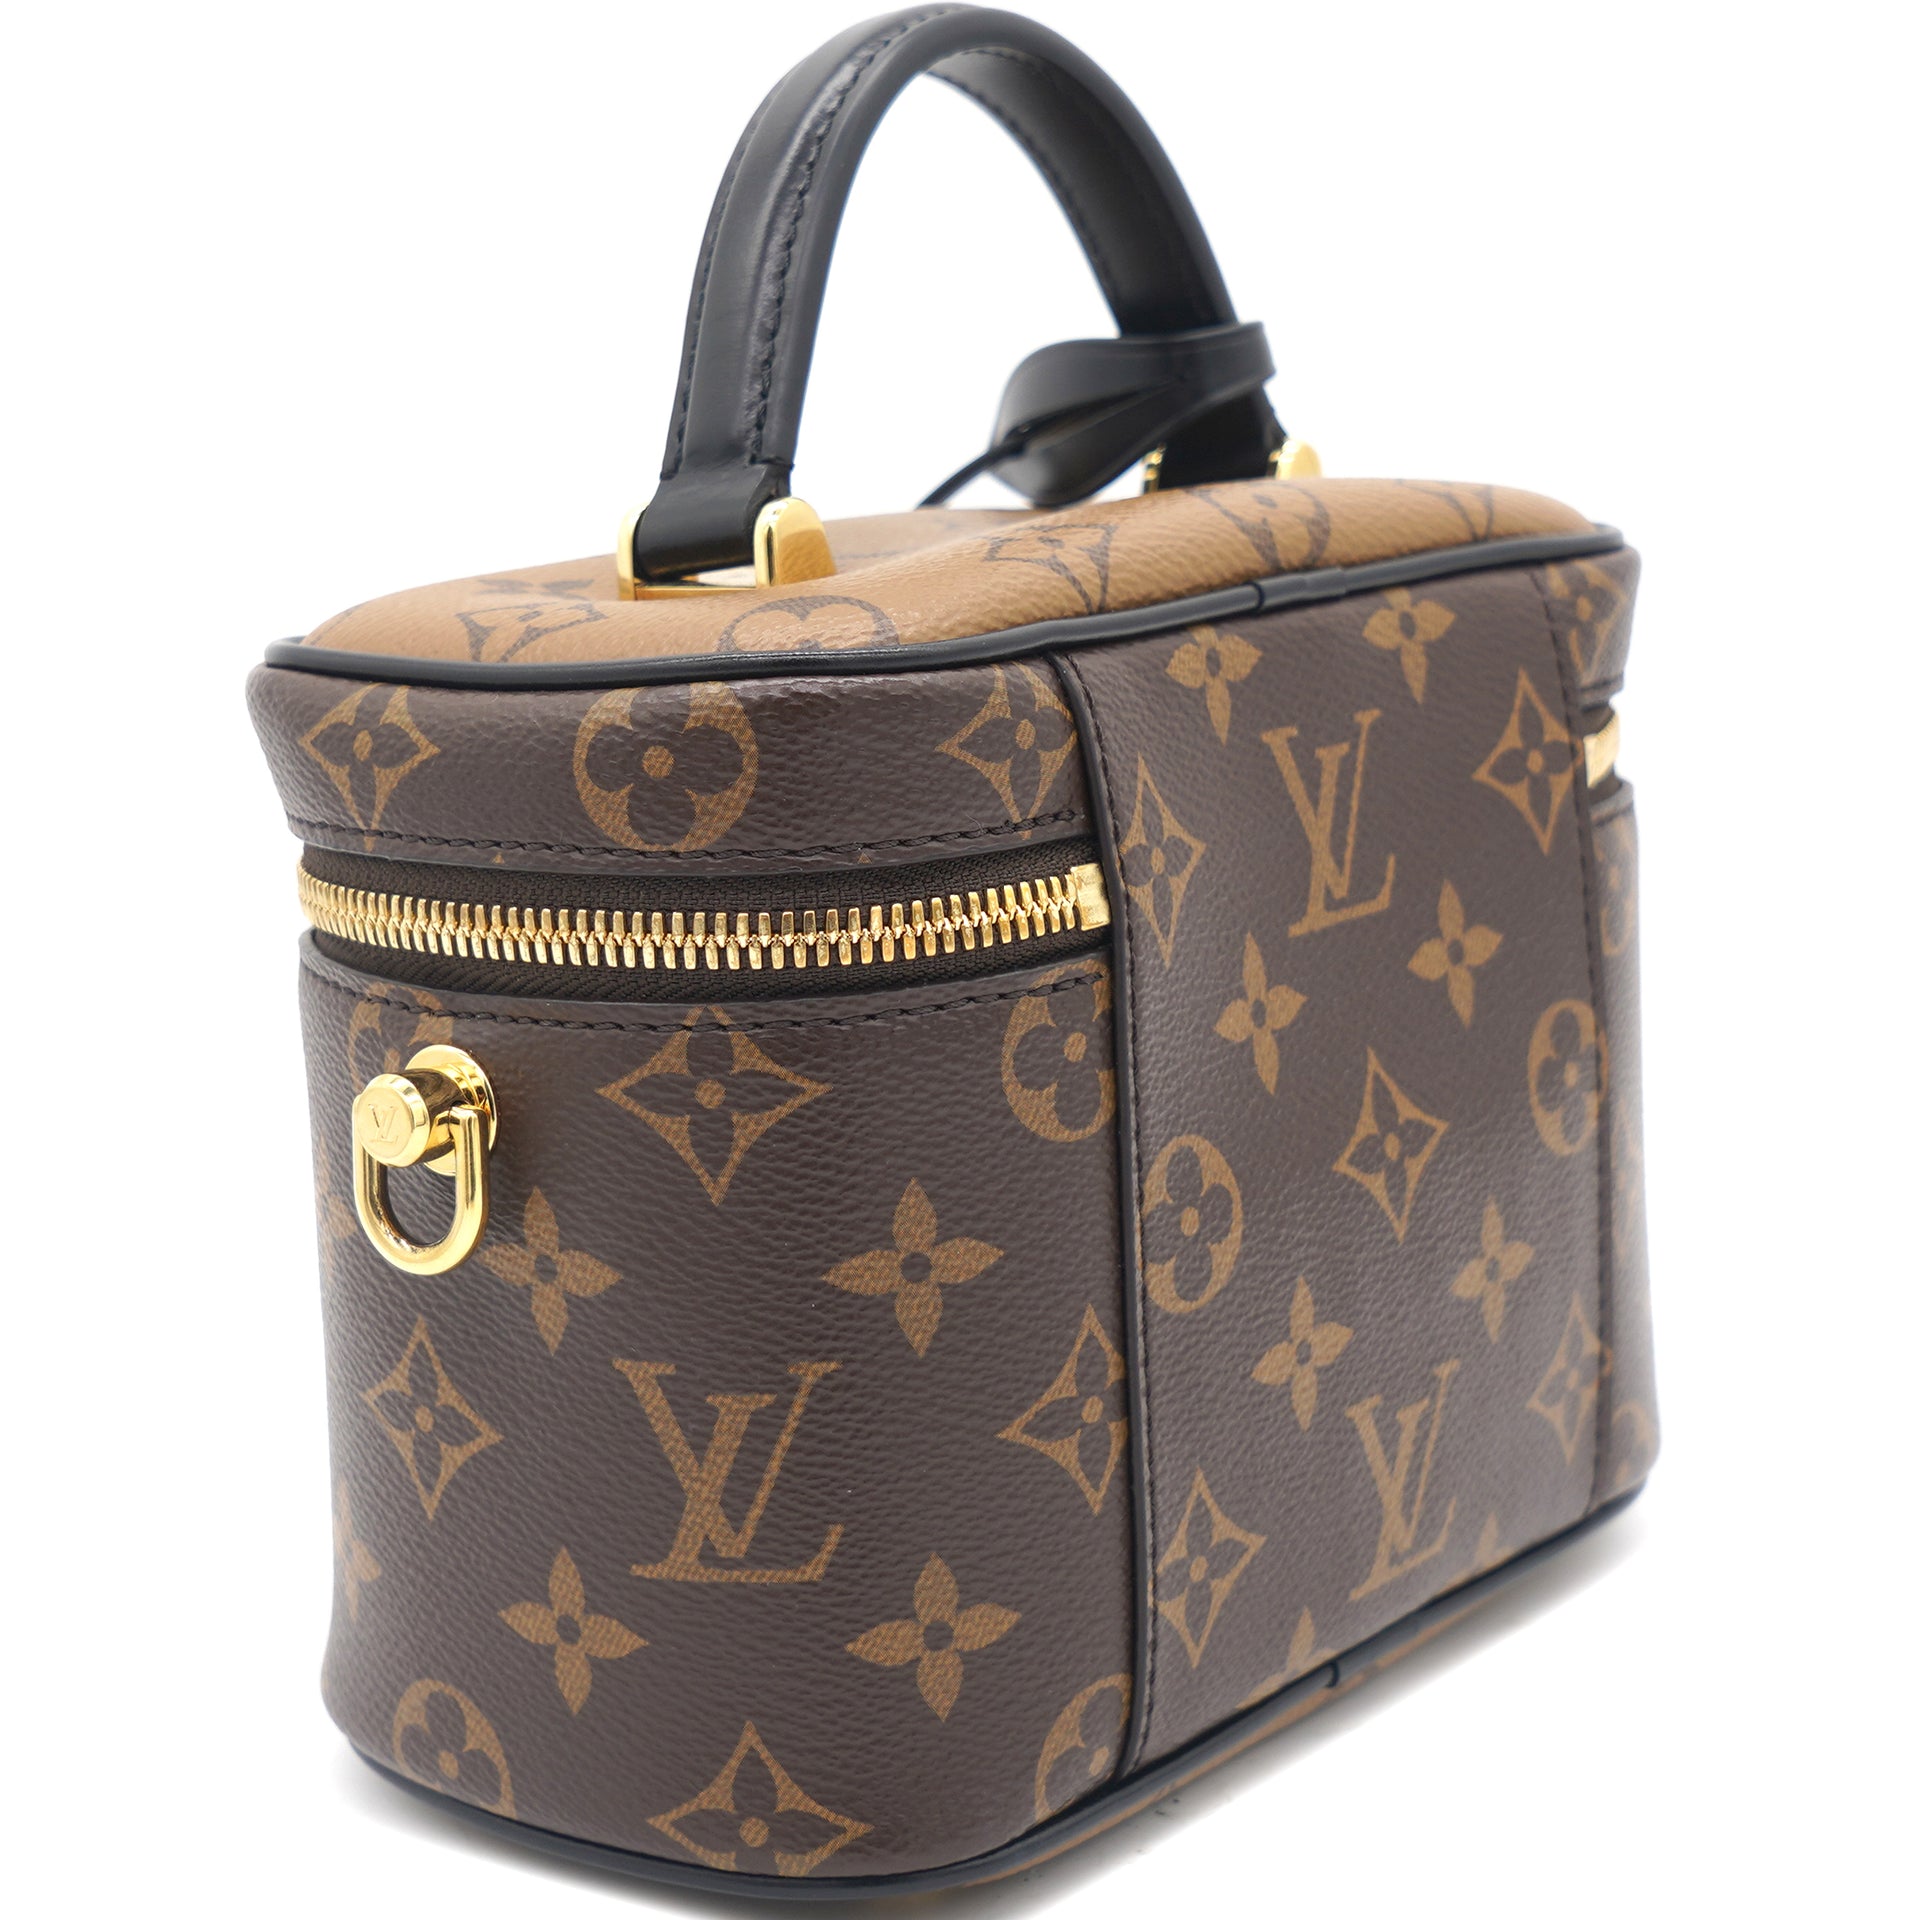 Luxury Personal Shopping on Instagram Louis Vuitton Vanity PM Available  for immediate shipment    lo  Louis vuitton Louis vuitton handbags  Women handbags